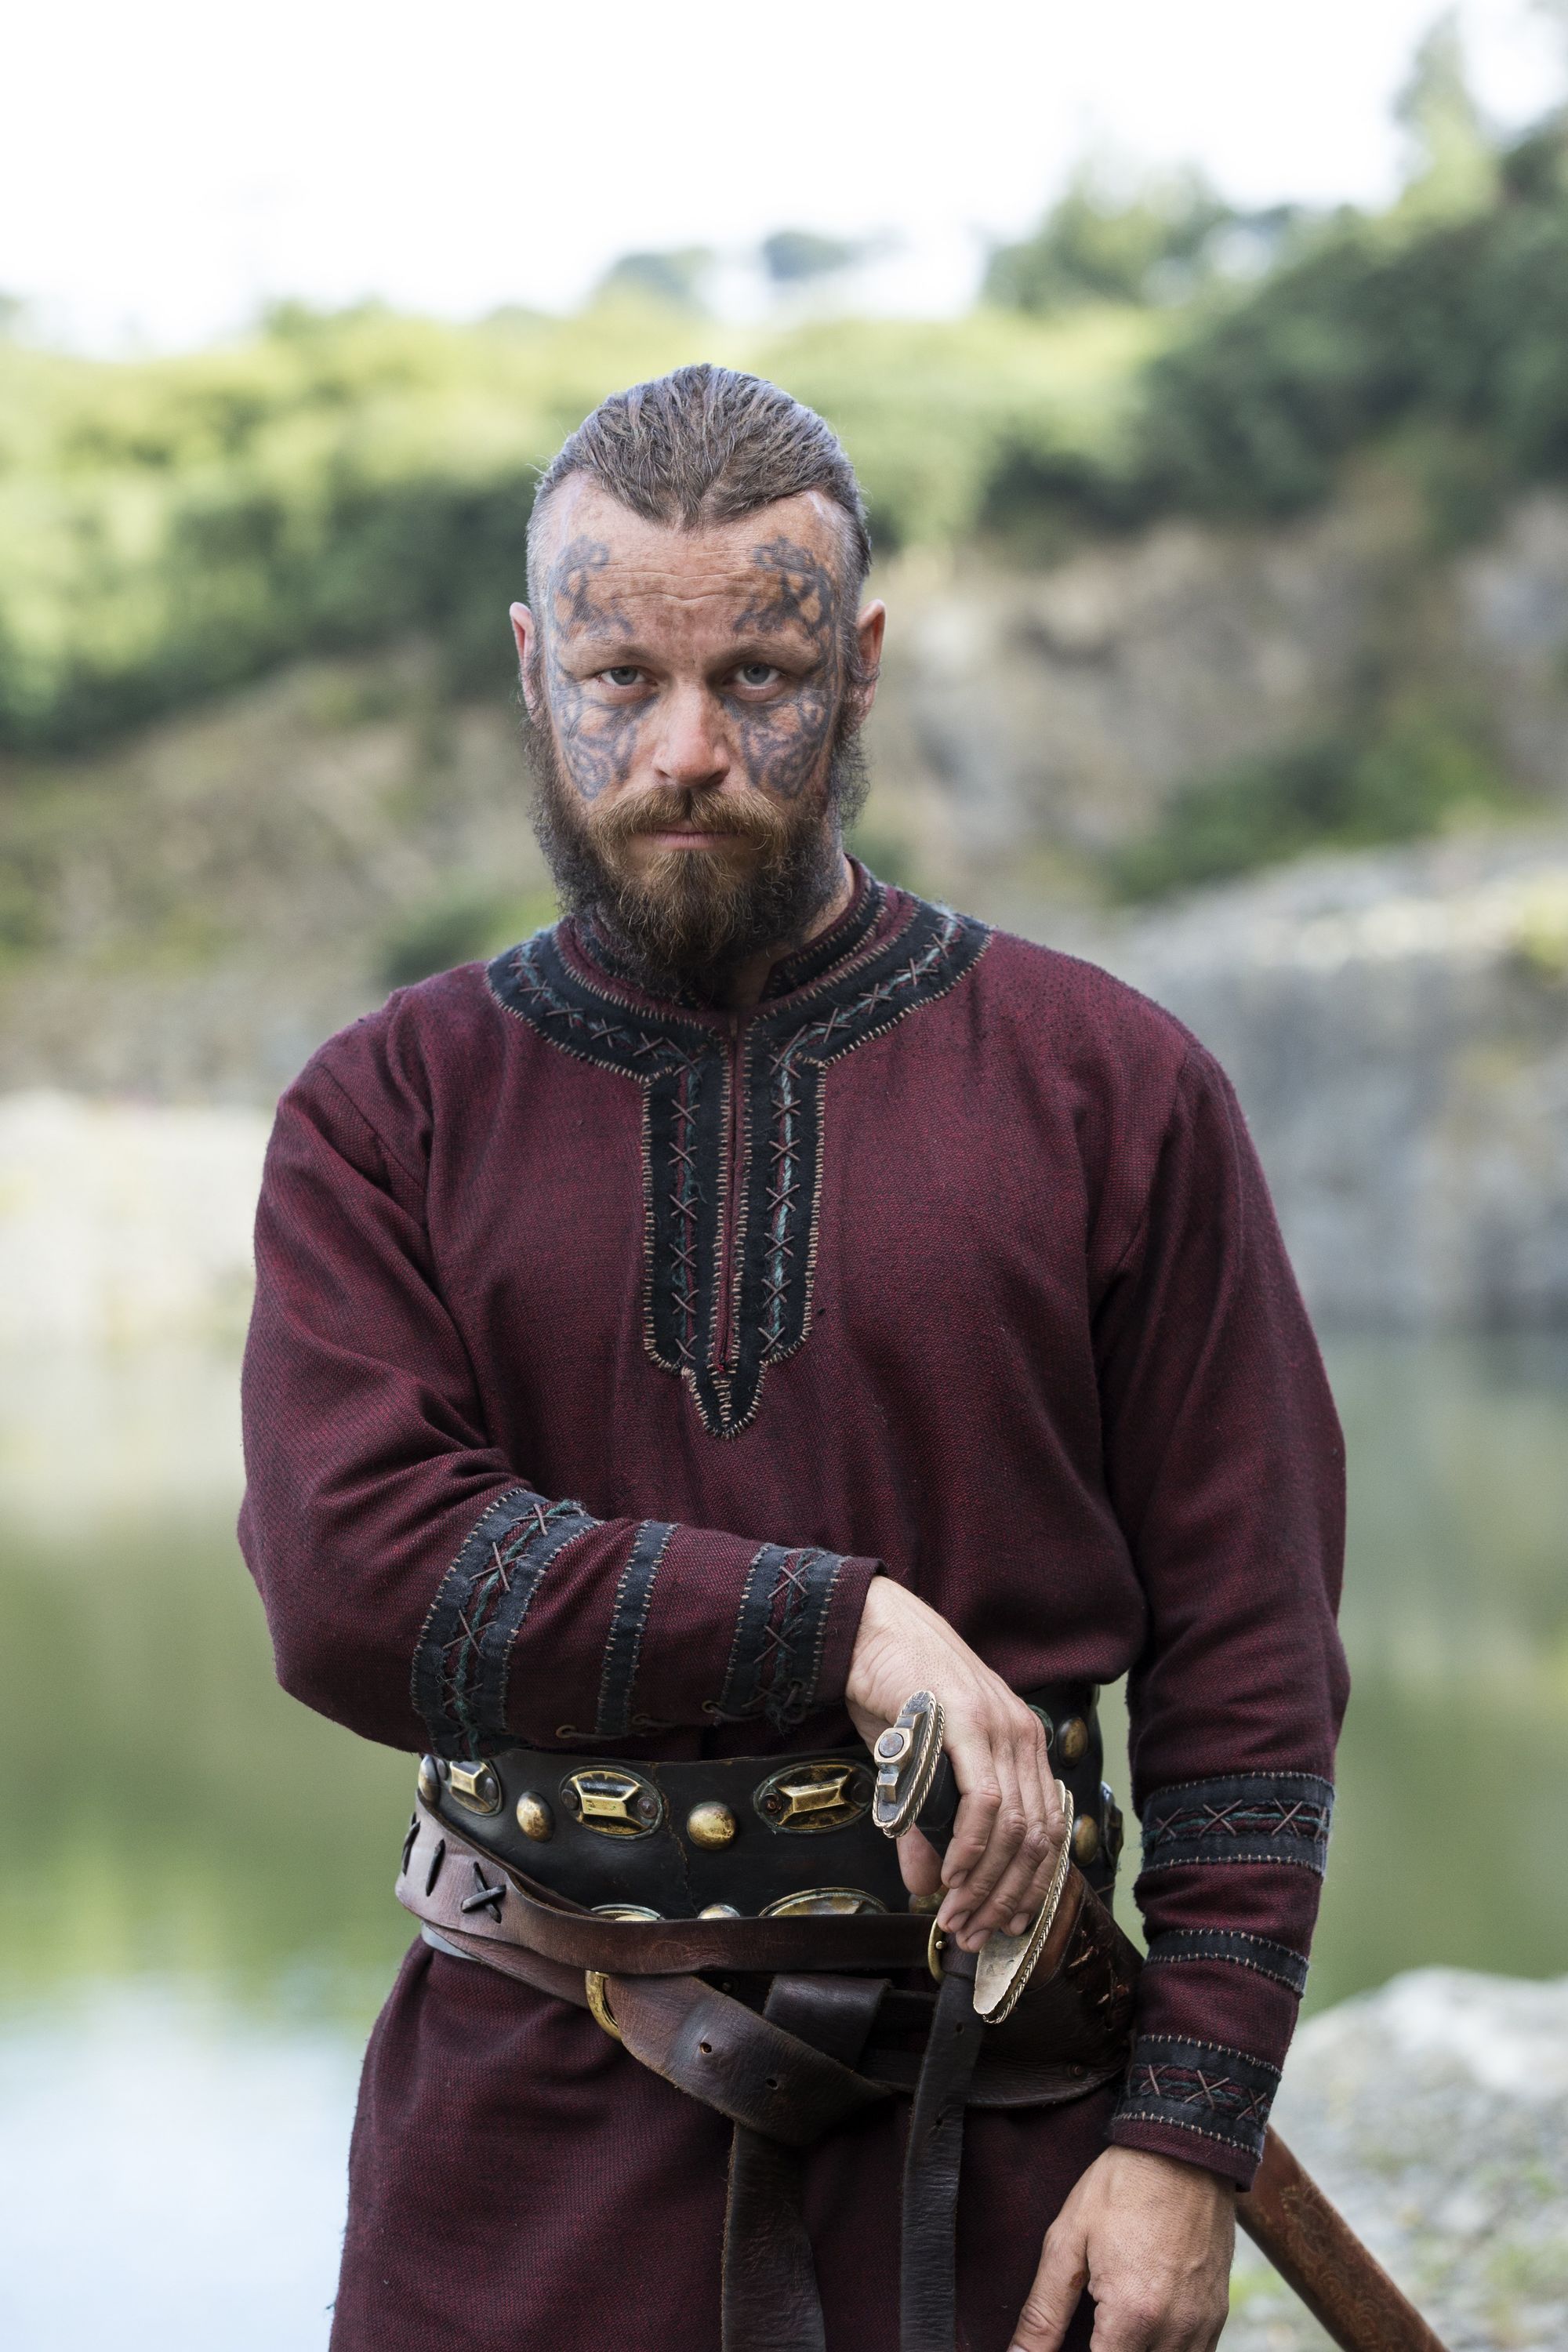 King Harald Finehair is a Scandinavian warrior and potential threat to Ragnar. Viking costume, Vikings tv show, Viking clothing